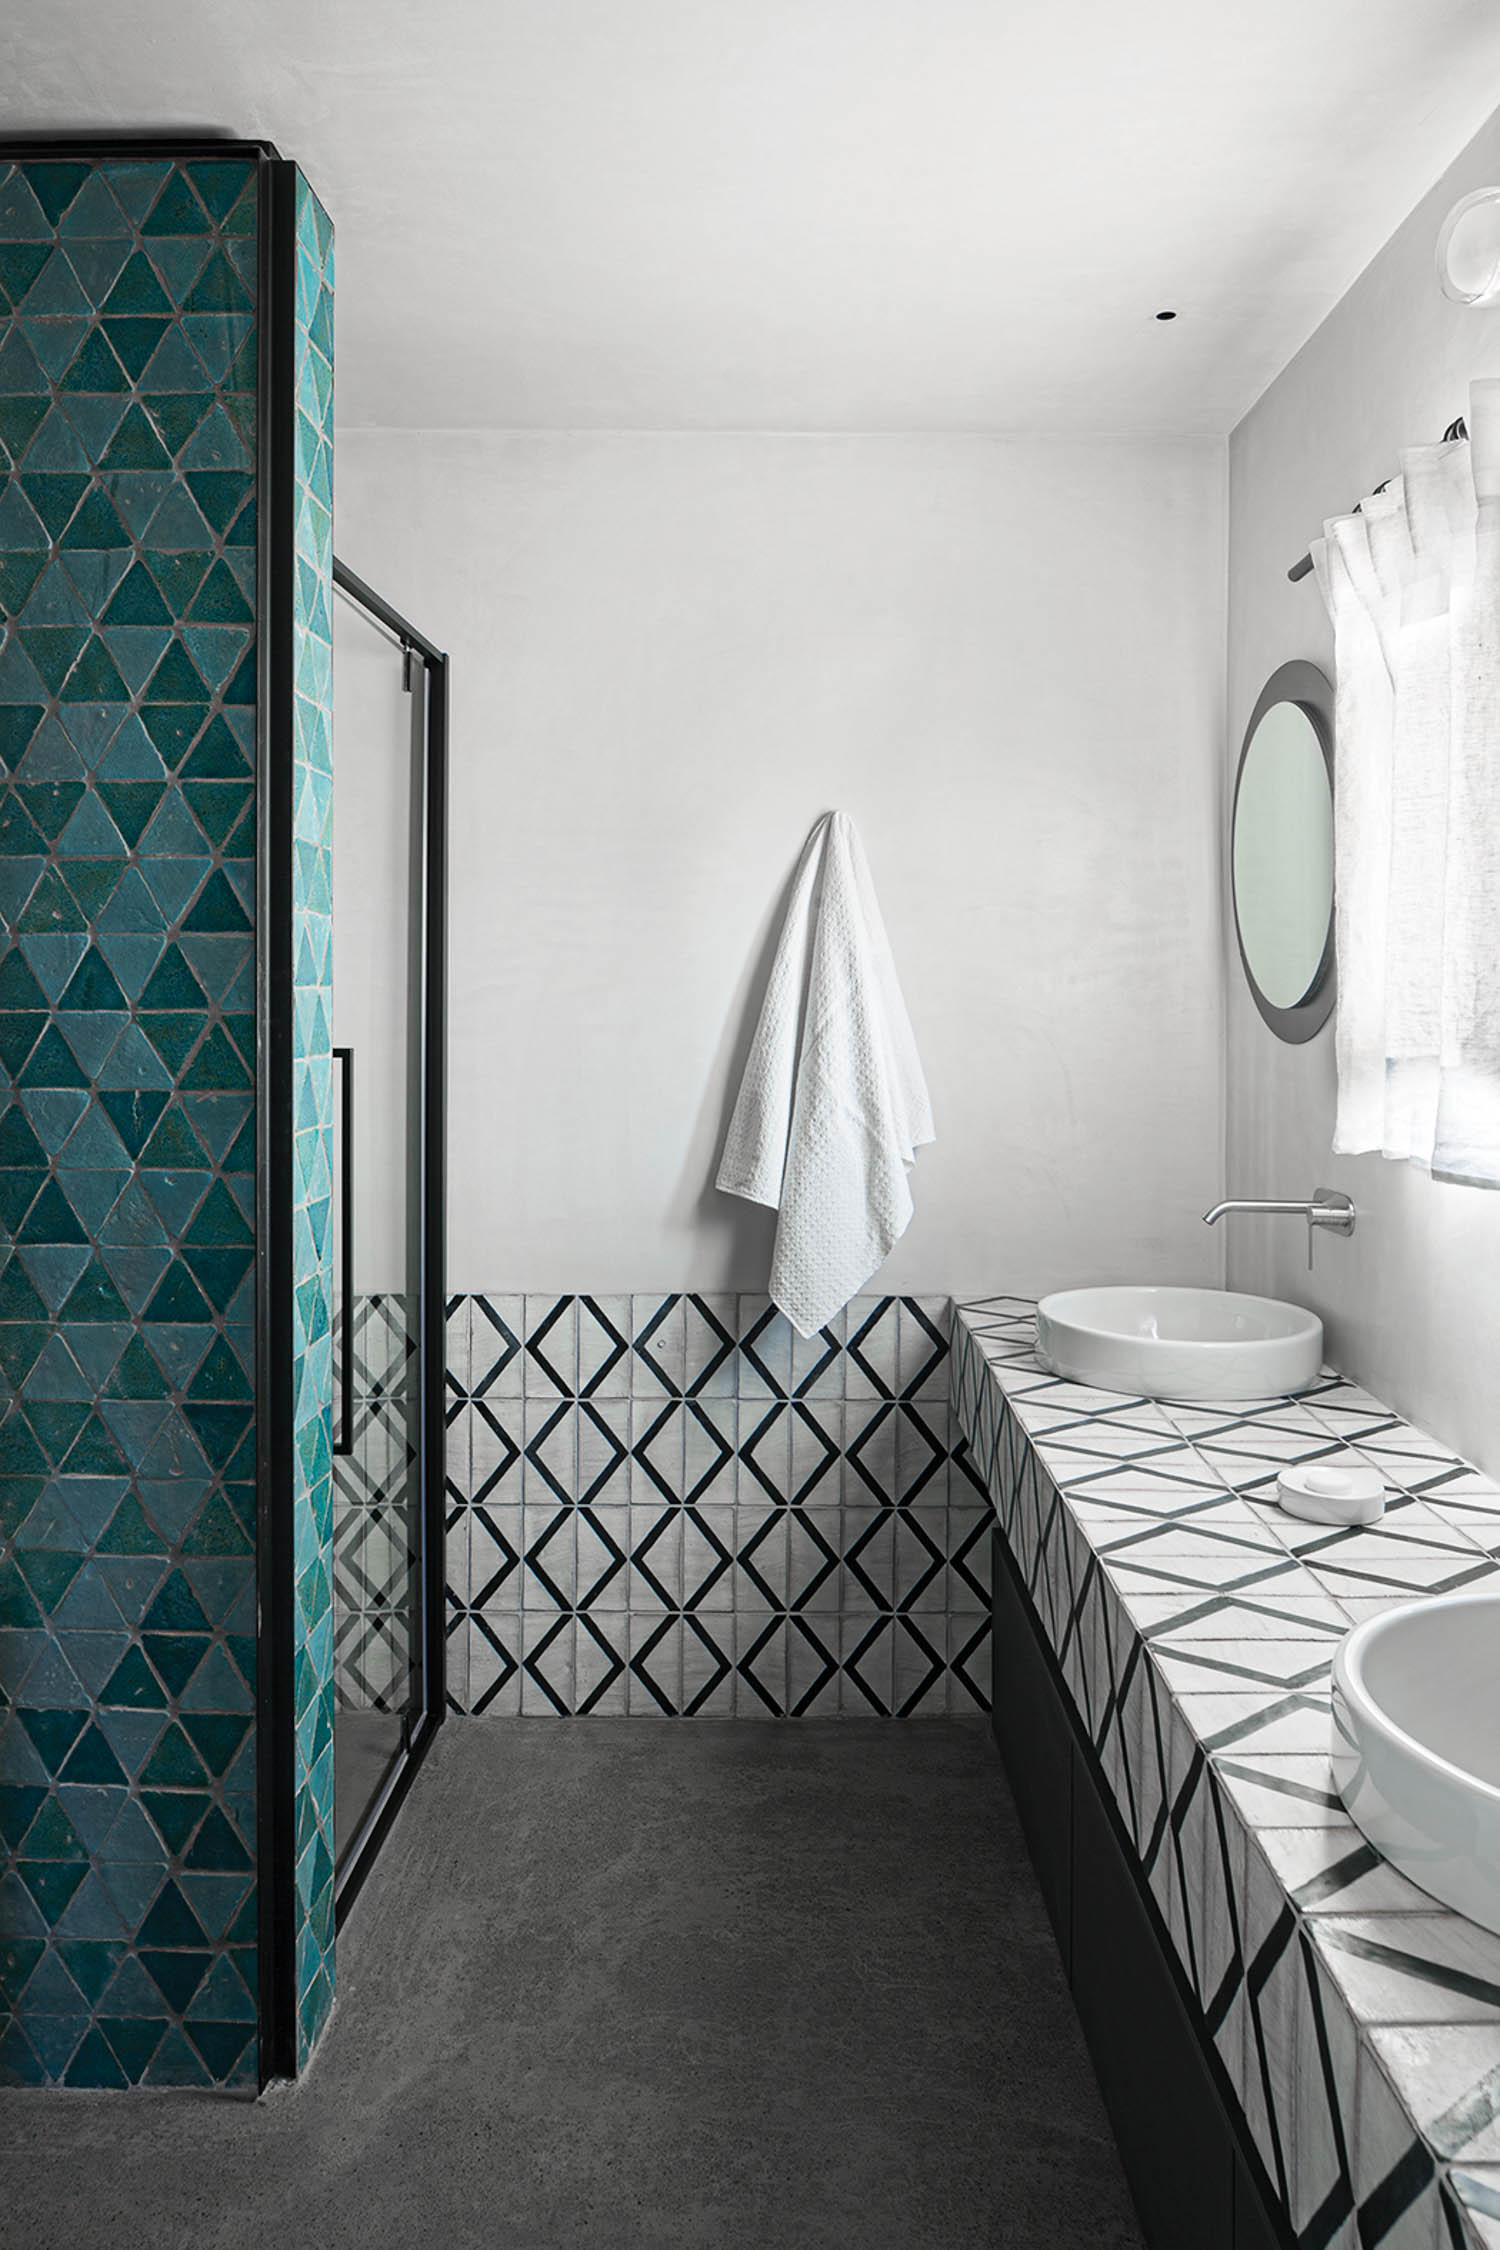 black and white countertops juxtaposed with shades of blue tile on a shower partition